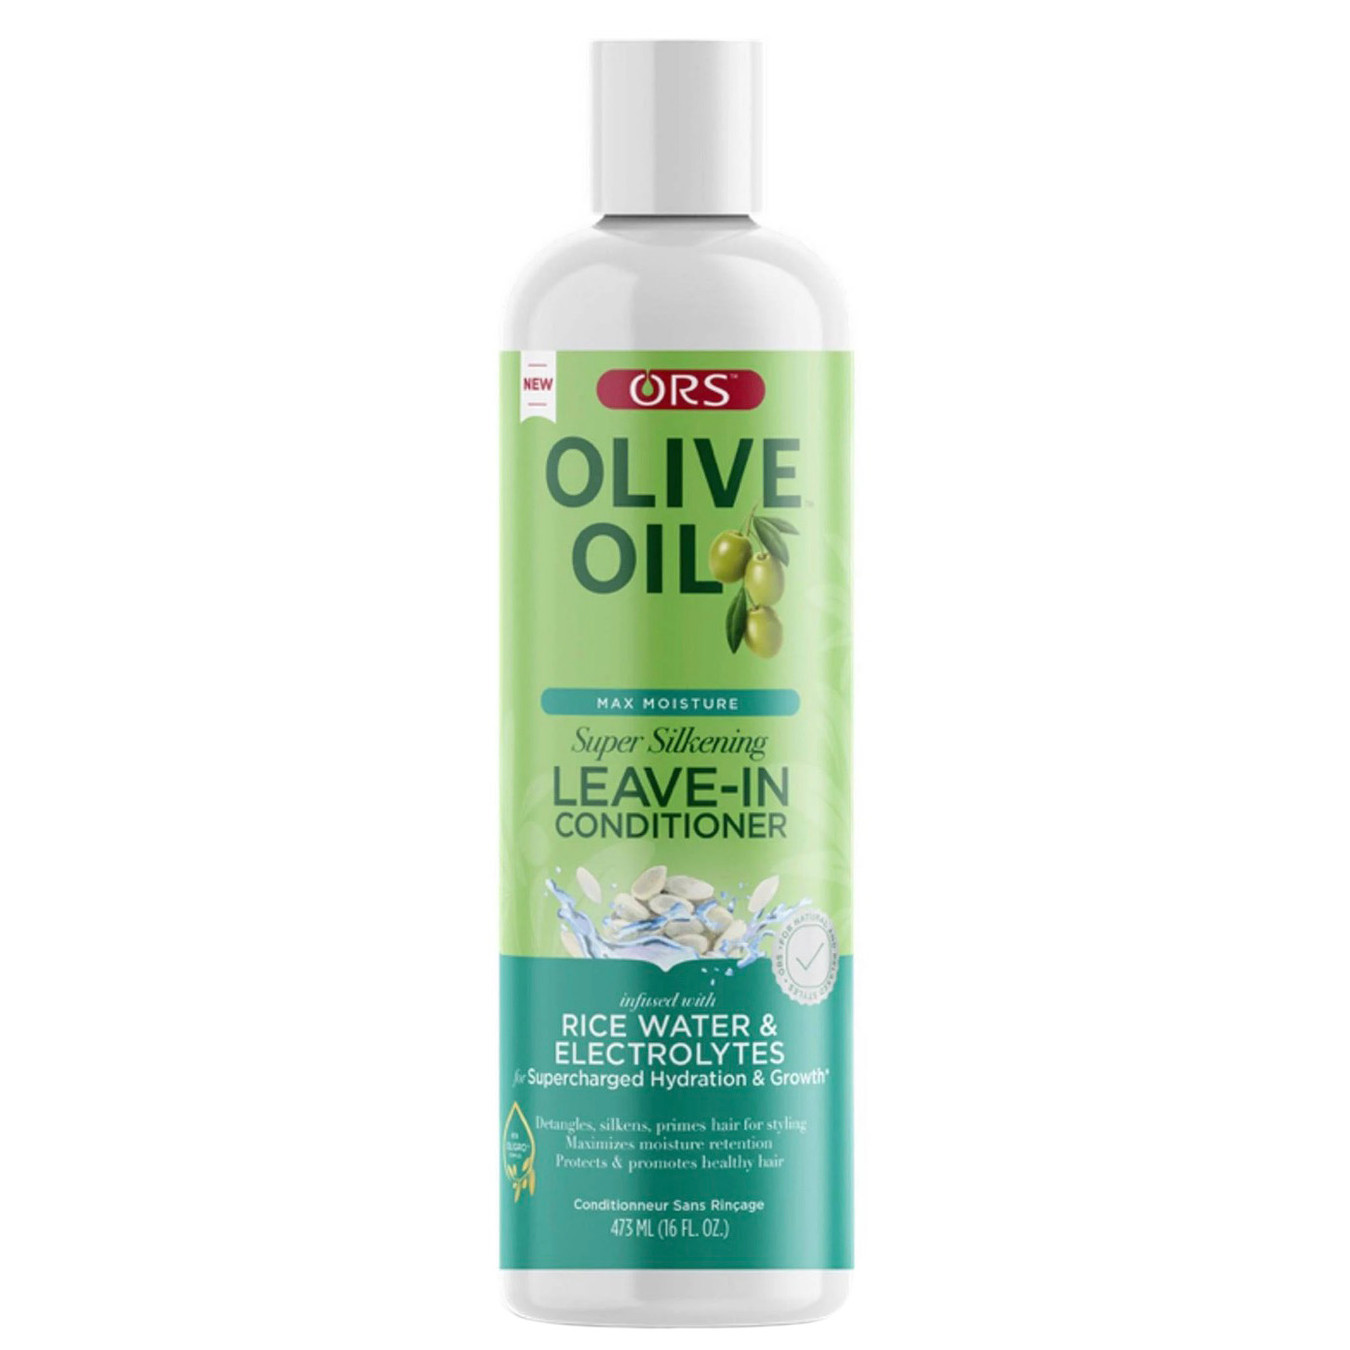 ORS Olive Oil Max Moisture Super Silkening Leave-In Conditioner (16 oz)